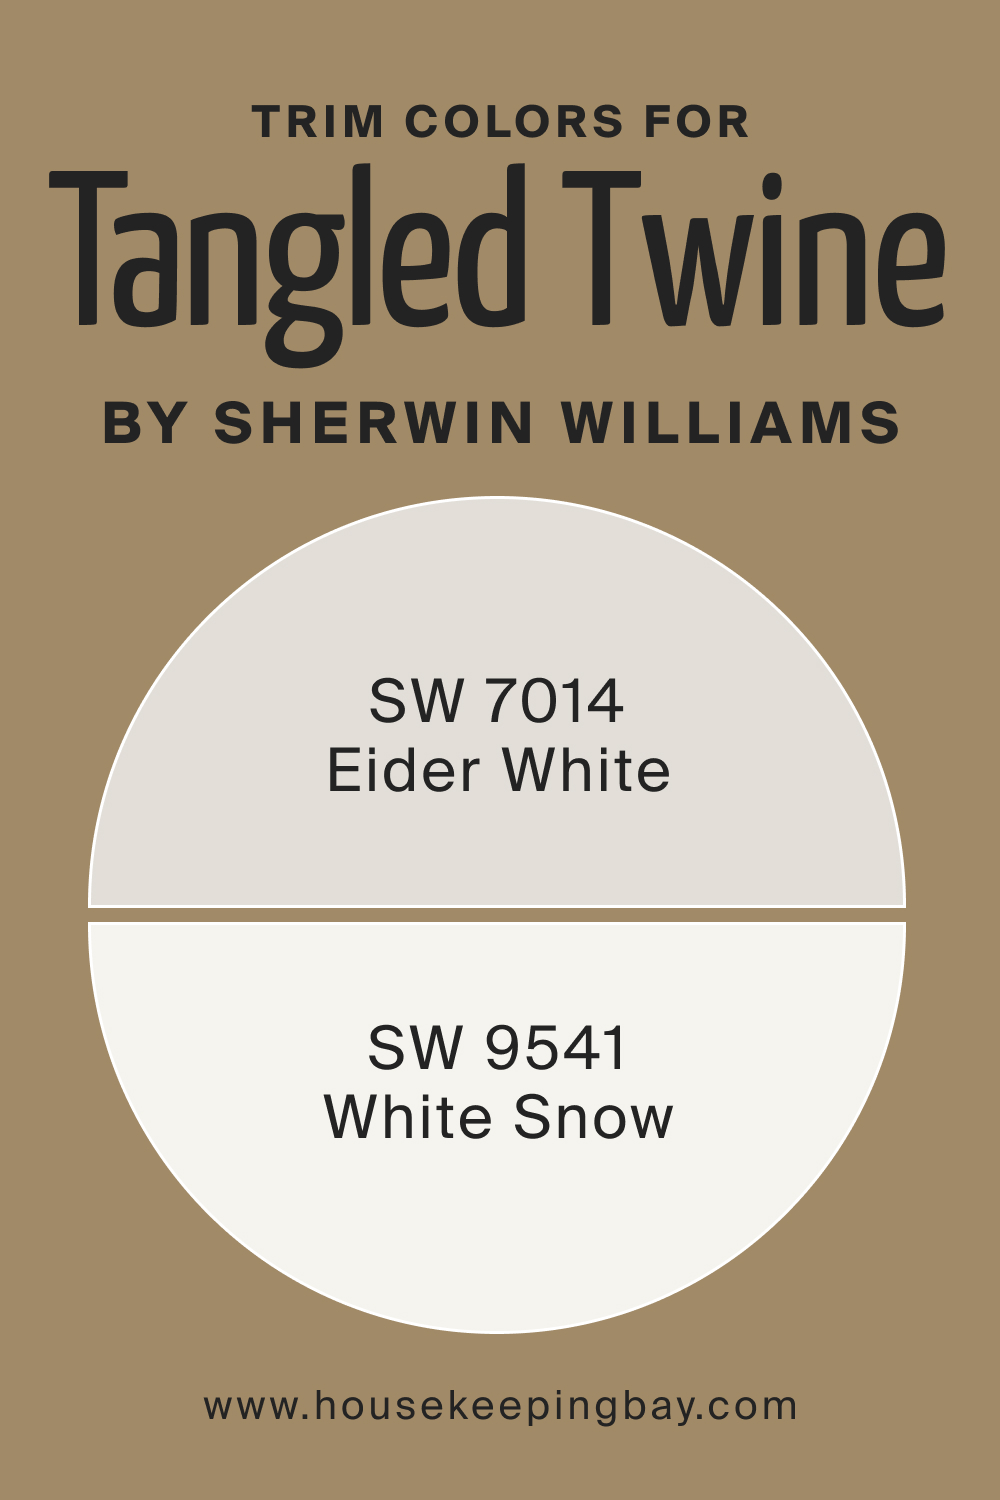 Trim Colors of SW 9538 Tangled Twine by Sherwin Williams